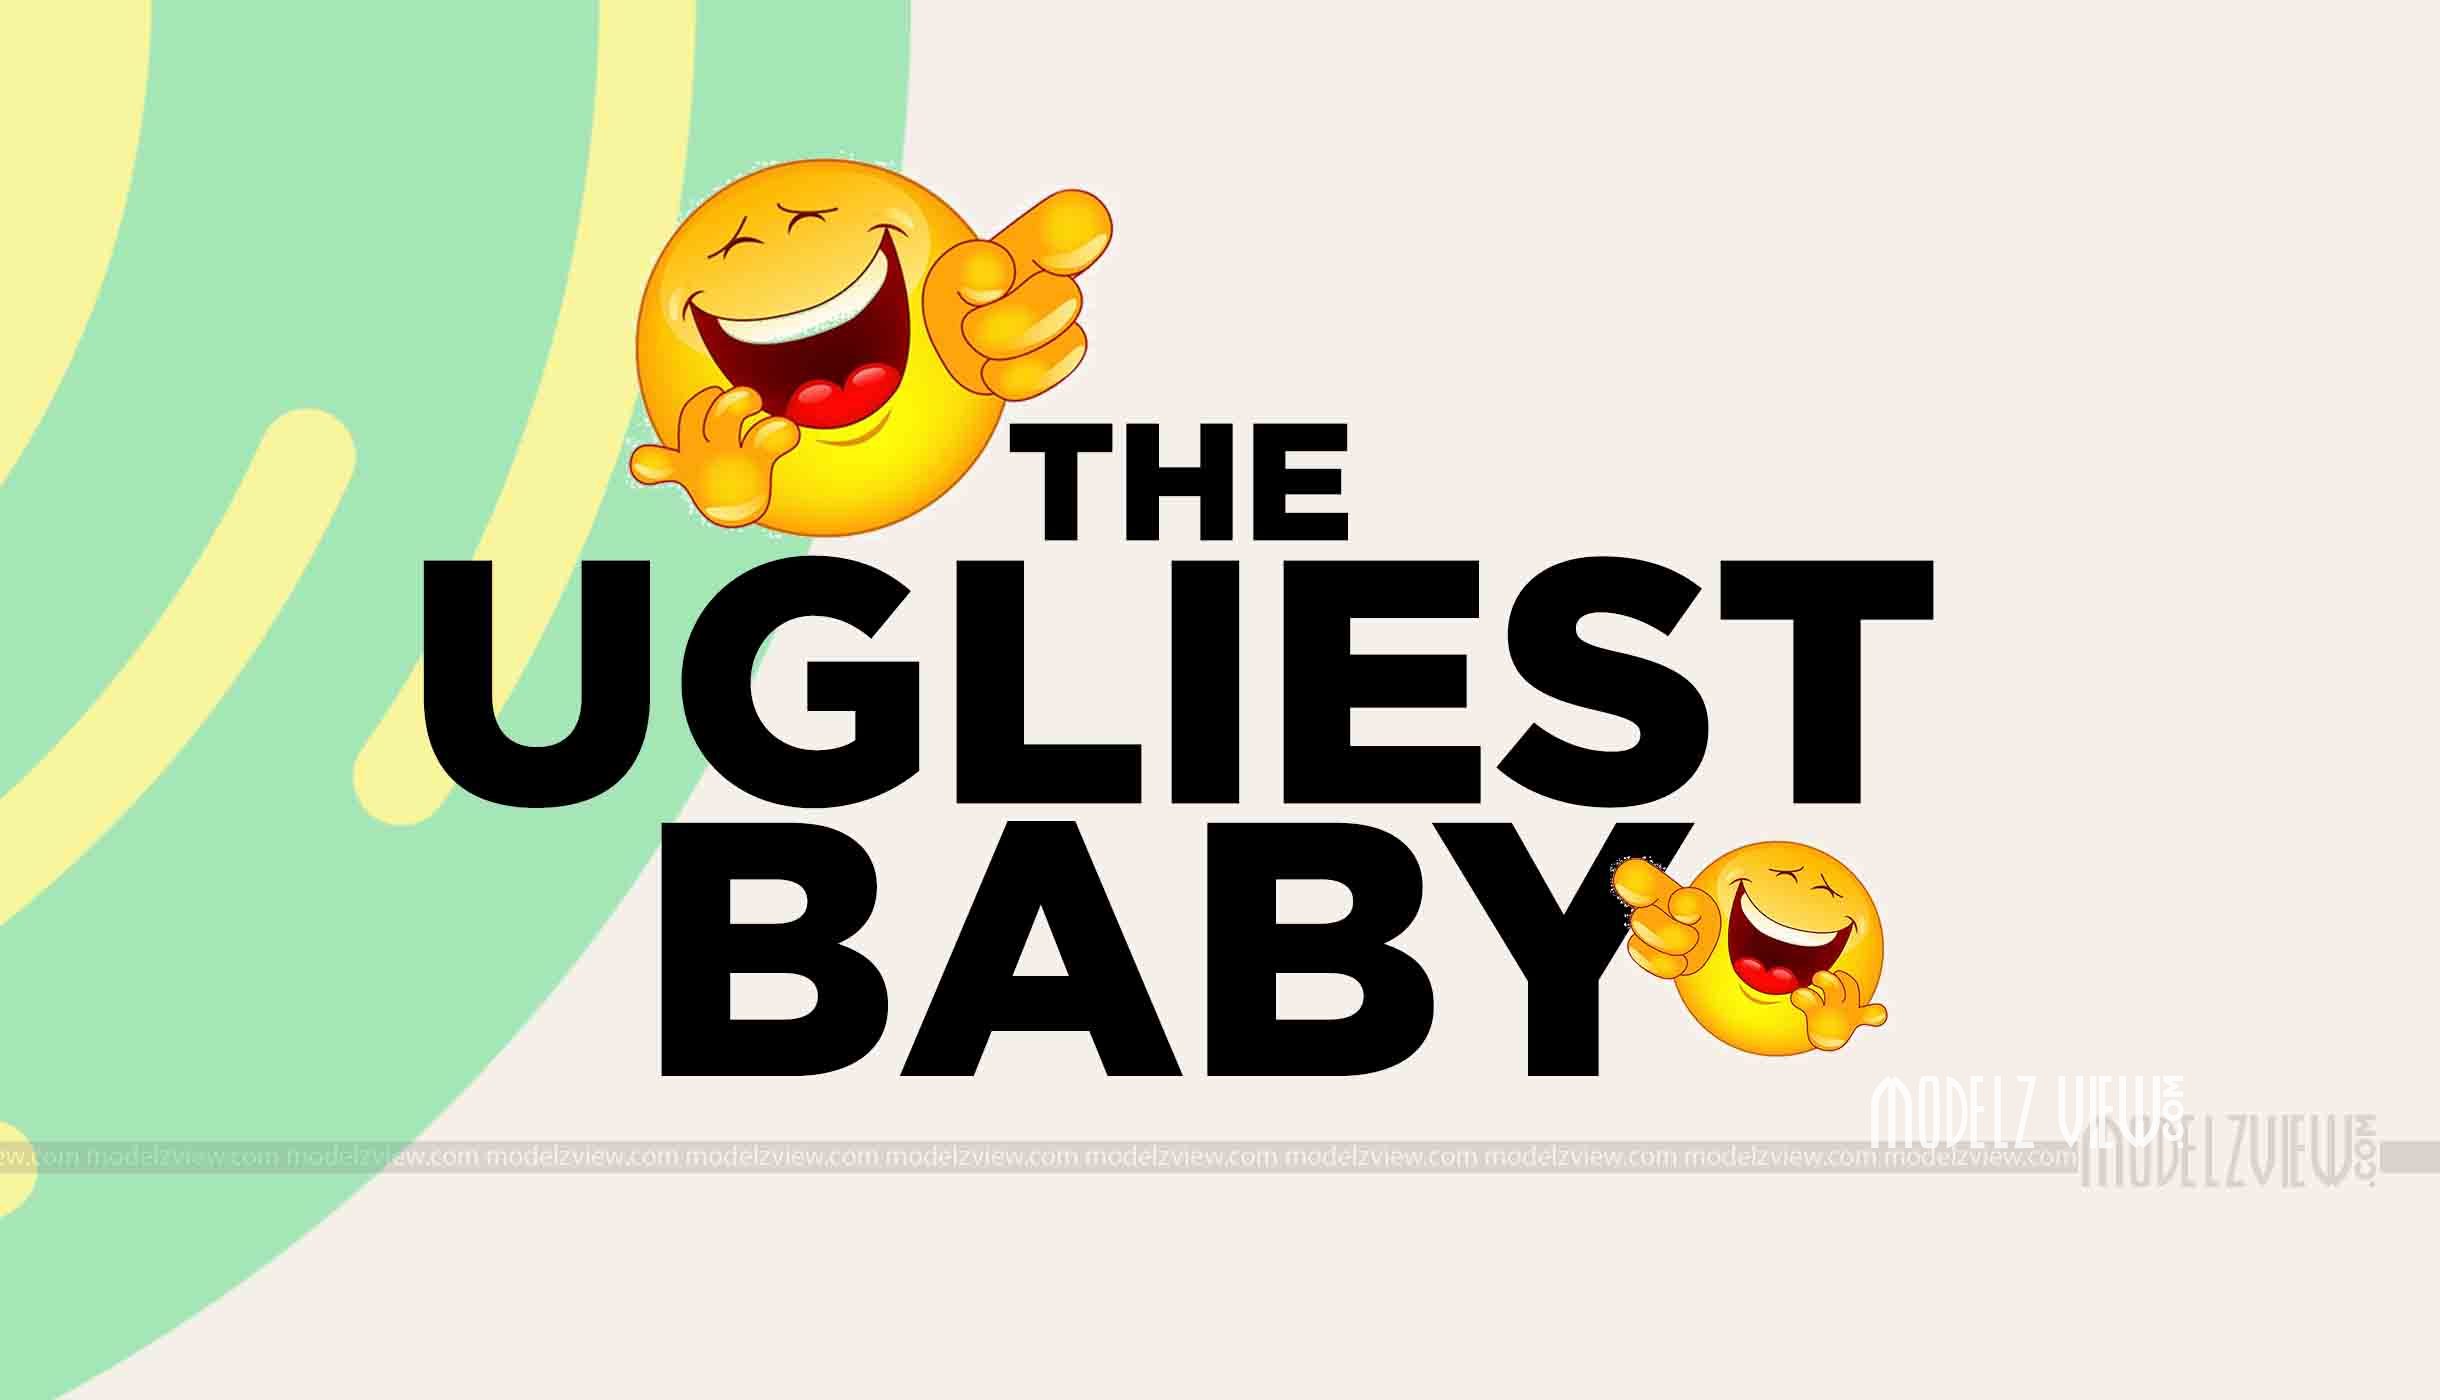 The Ugliest Baby Funny Jokes That Never Get Old Vol 02 Modelz